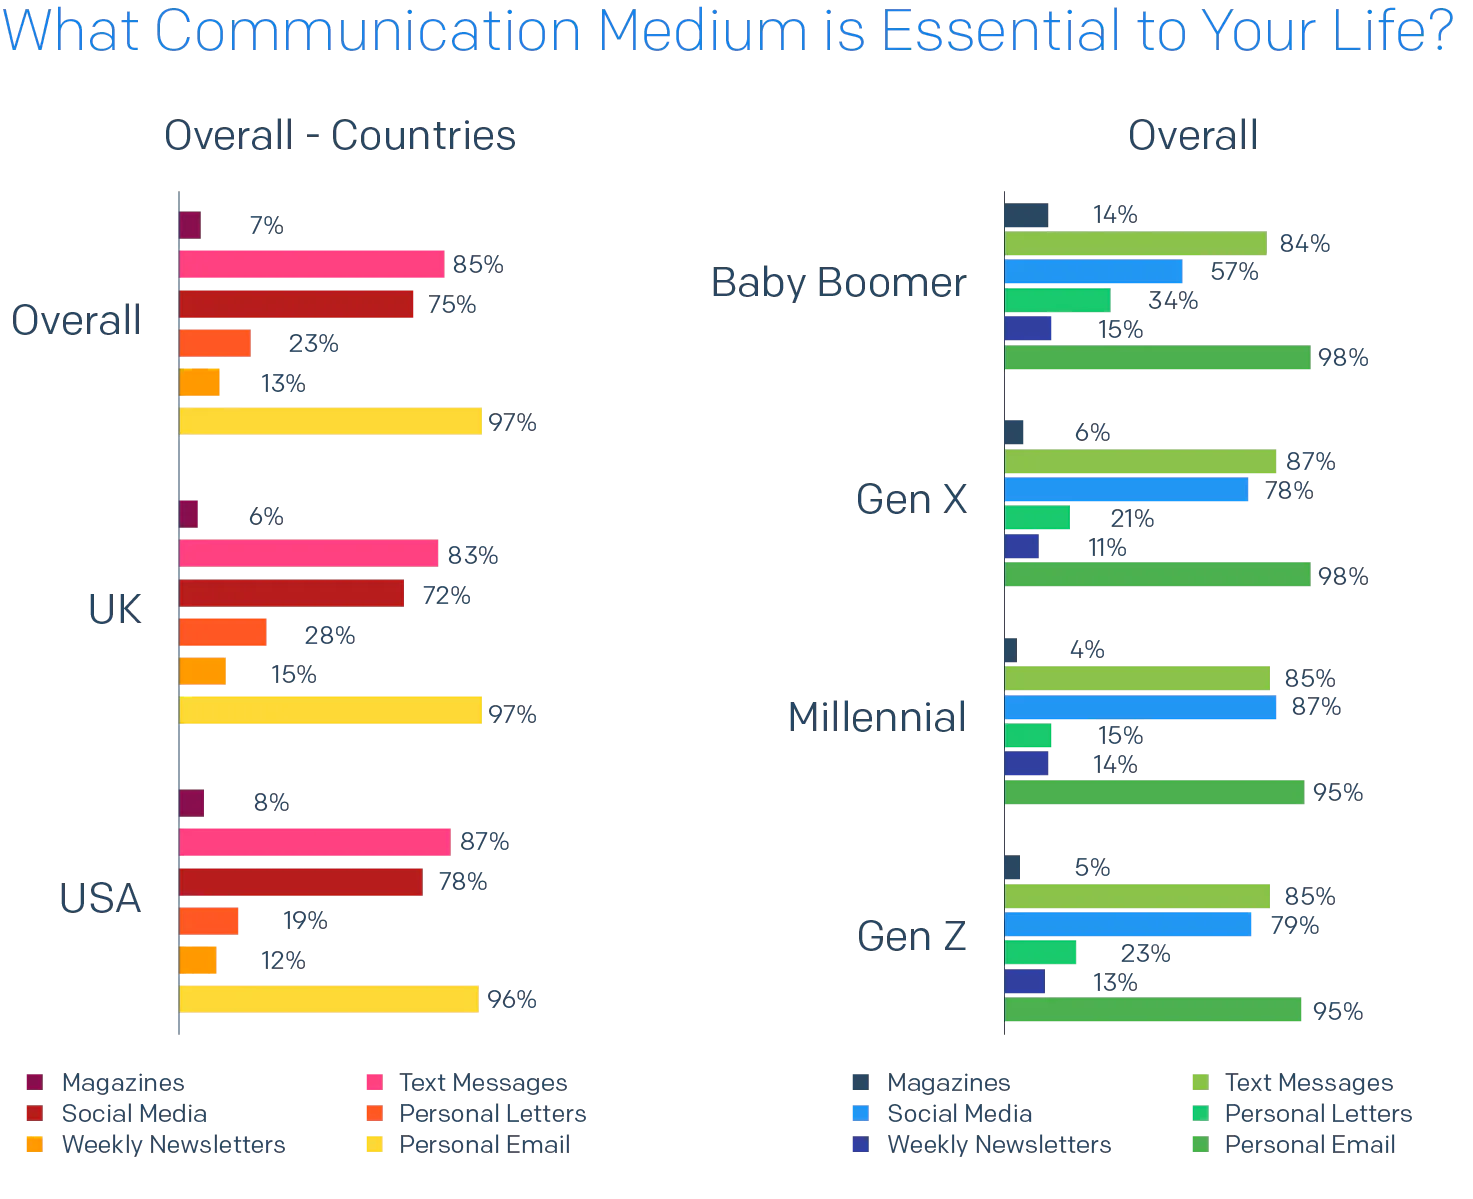 bar chart of what communication medium is essential to your life?